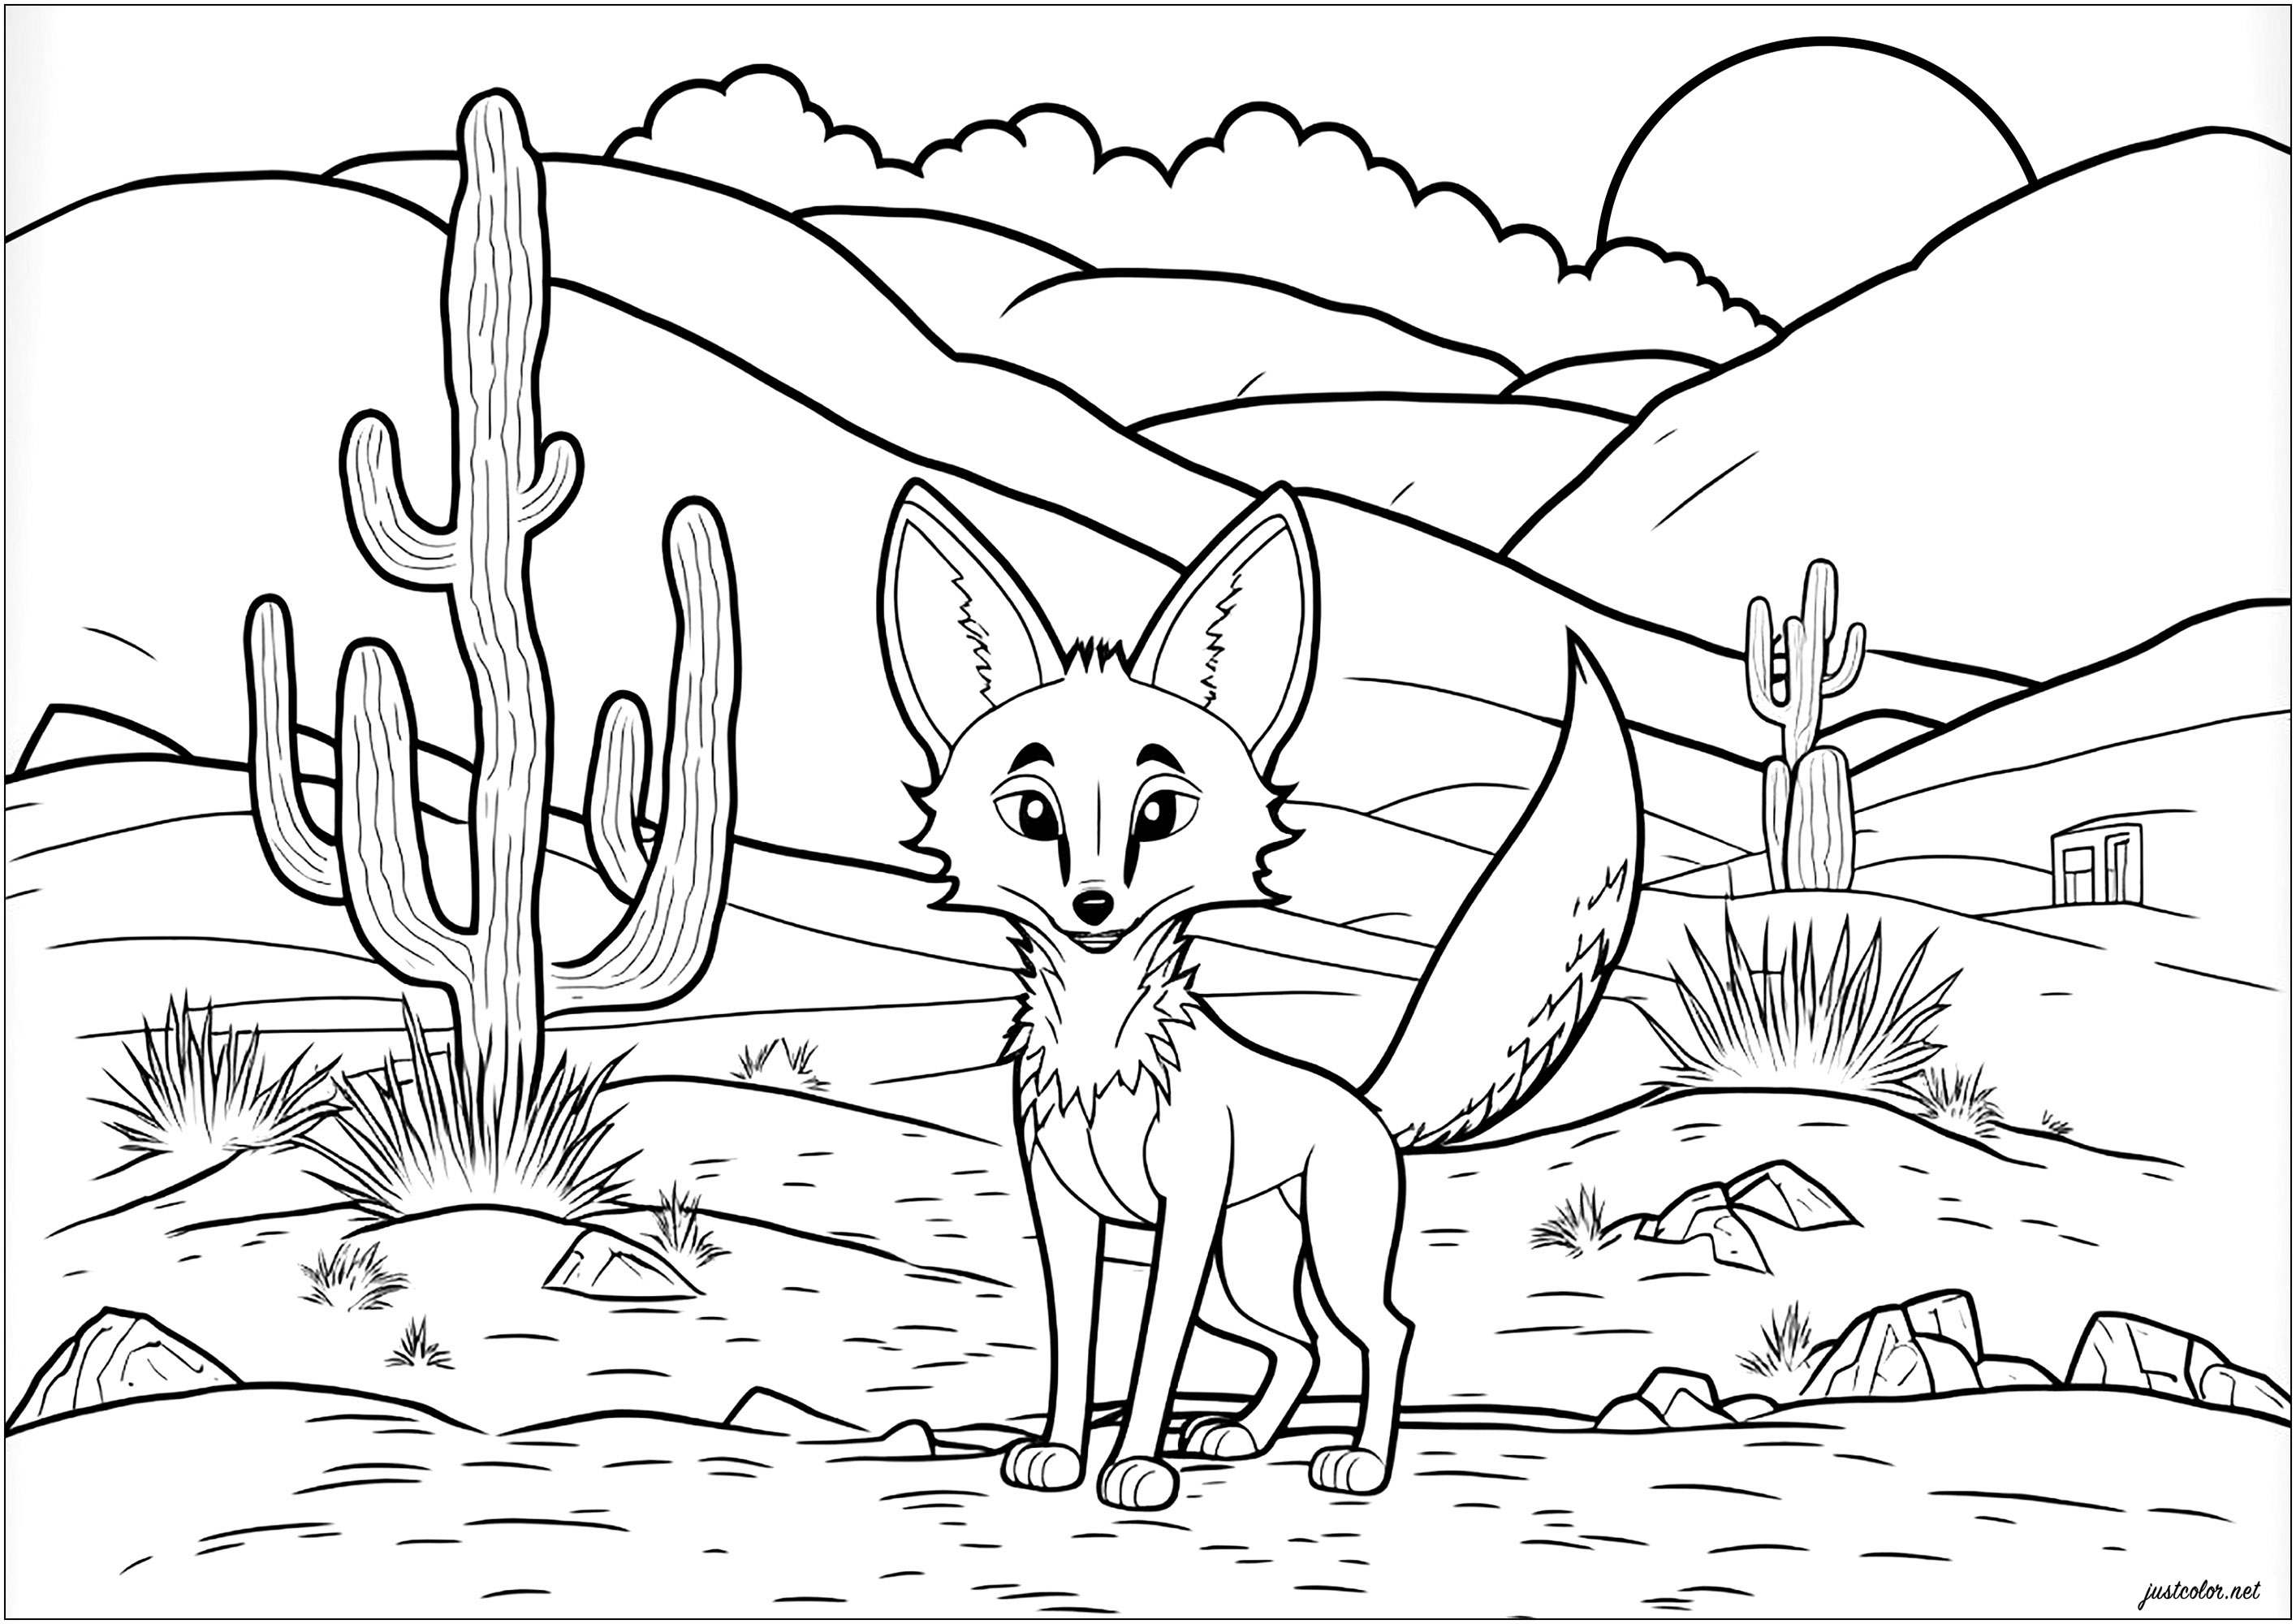 Smart desert fox to color. Like the bold fox, trust your instincts and your ability to overcome challenges to achieve your dreams.